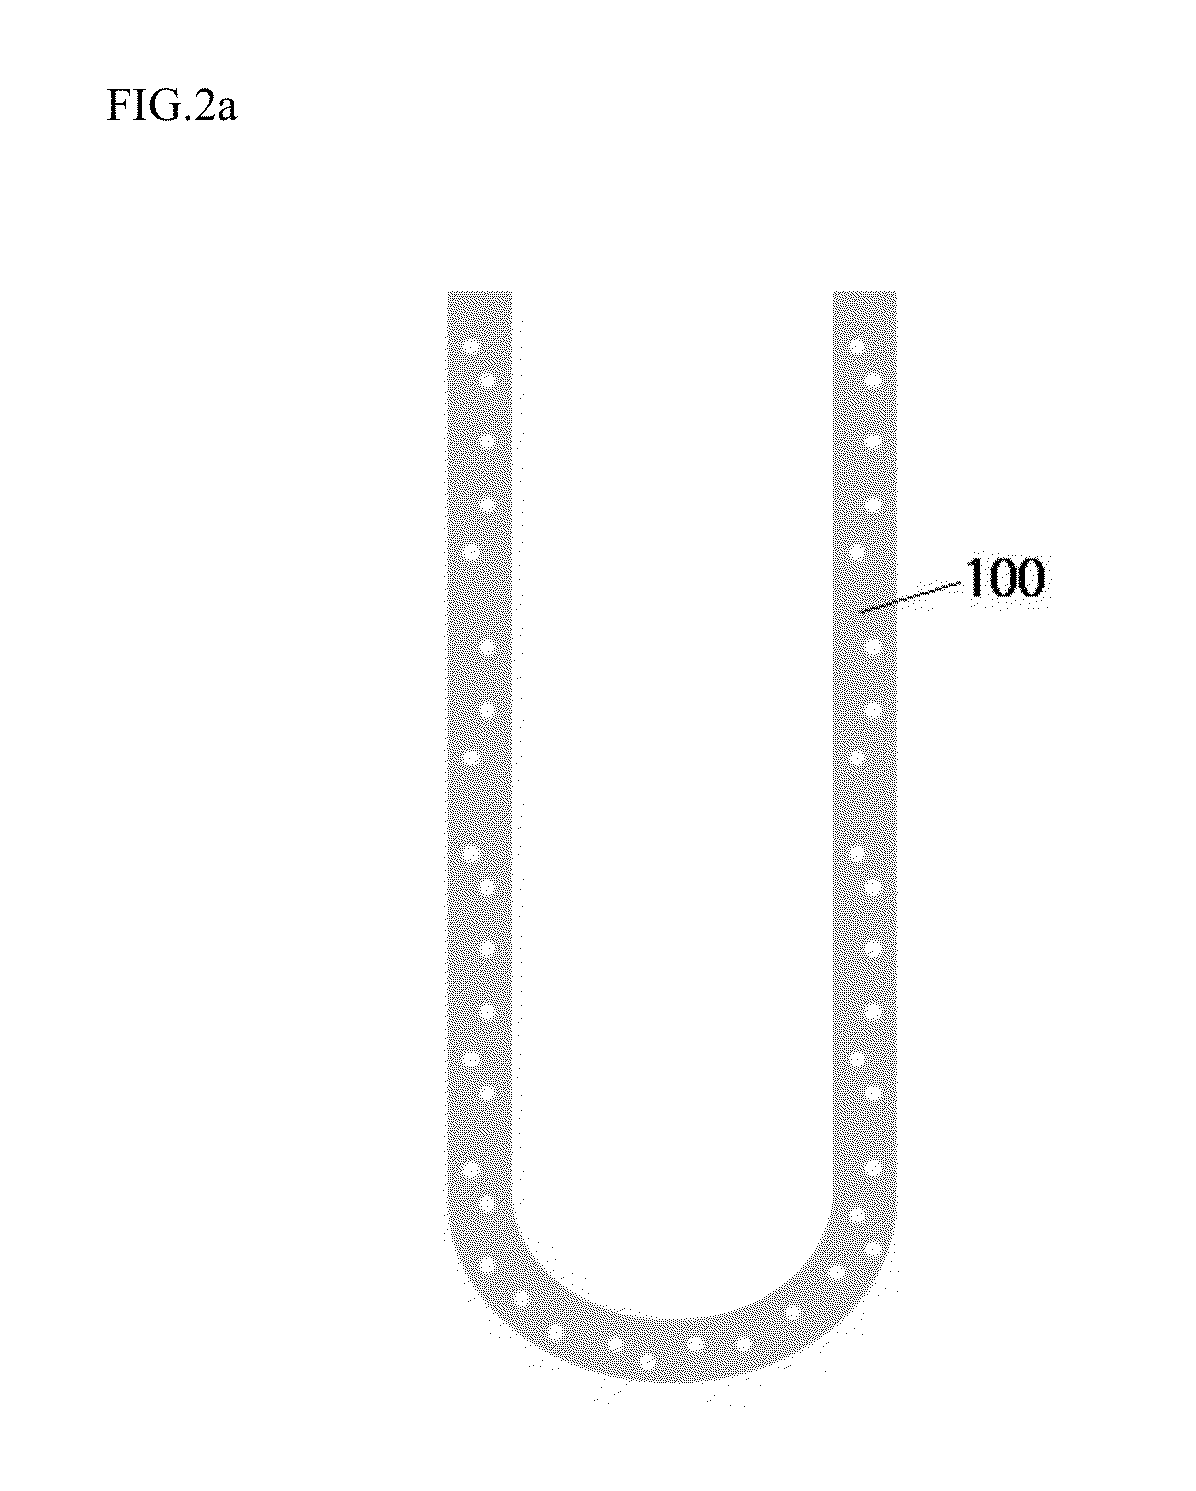 Amtec unit cell with partially opened internal electrode and method for manufacturing the amtec cell